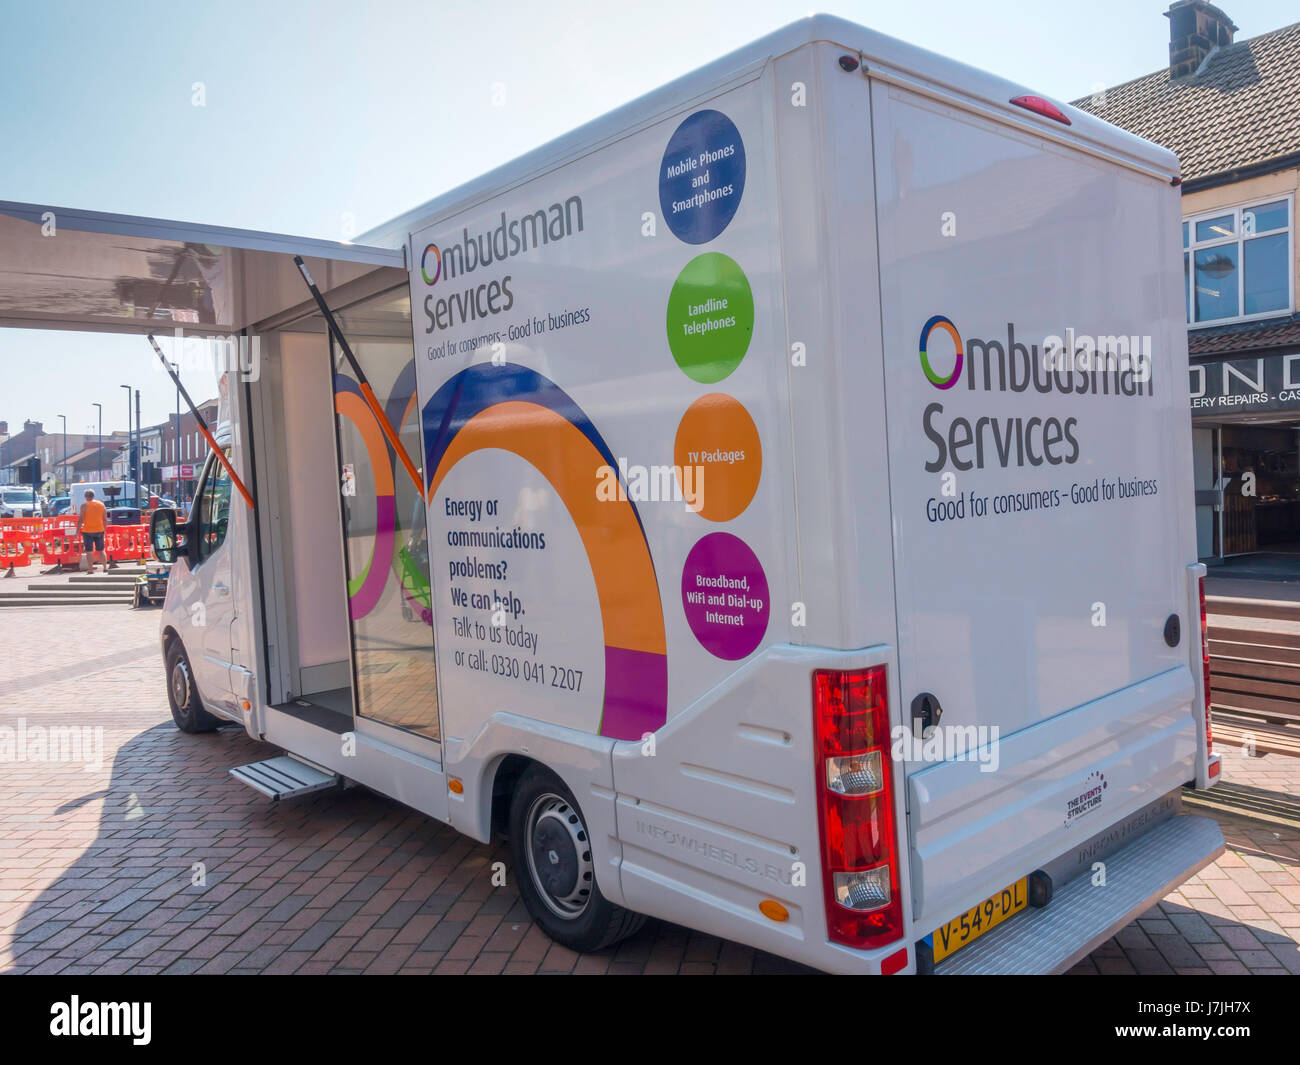 A van offering Ombudsman services for consumers having problems with communication services or energy supplies in a small town High Street Stock Photo